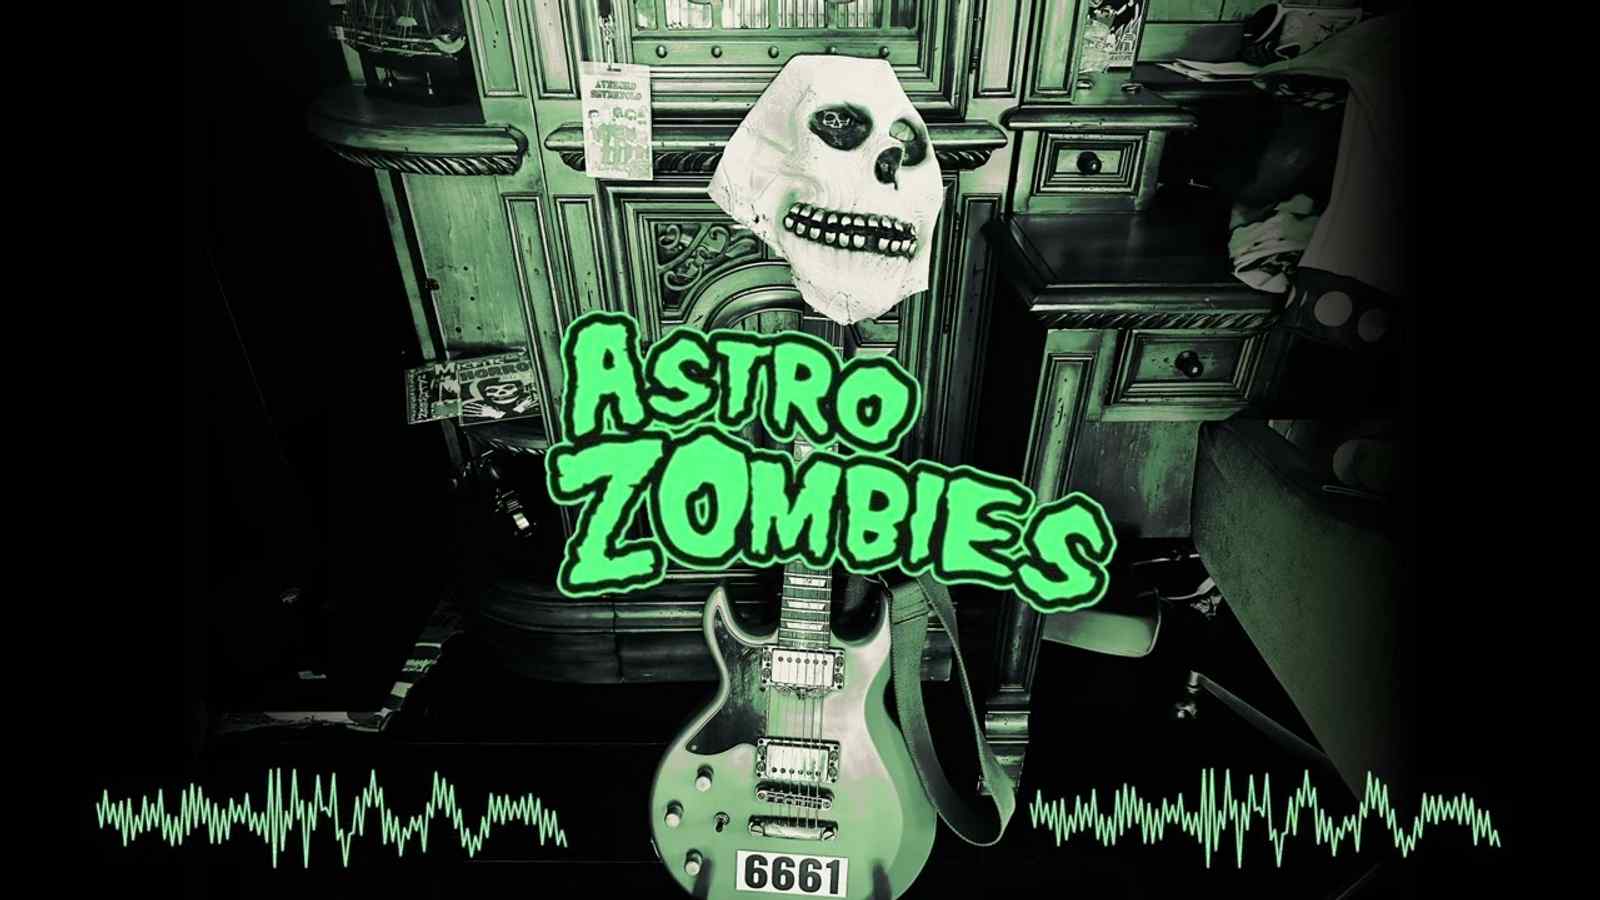 Astro Zombies (Misfits Cover)